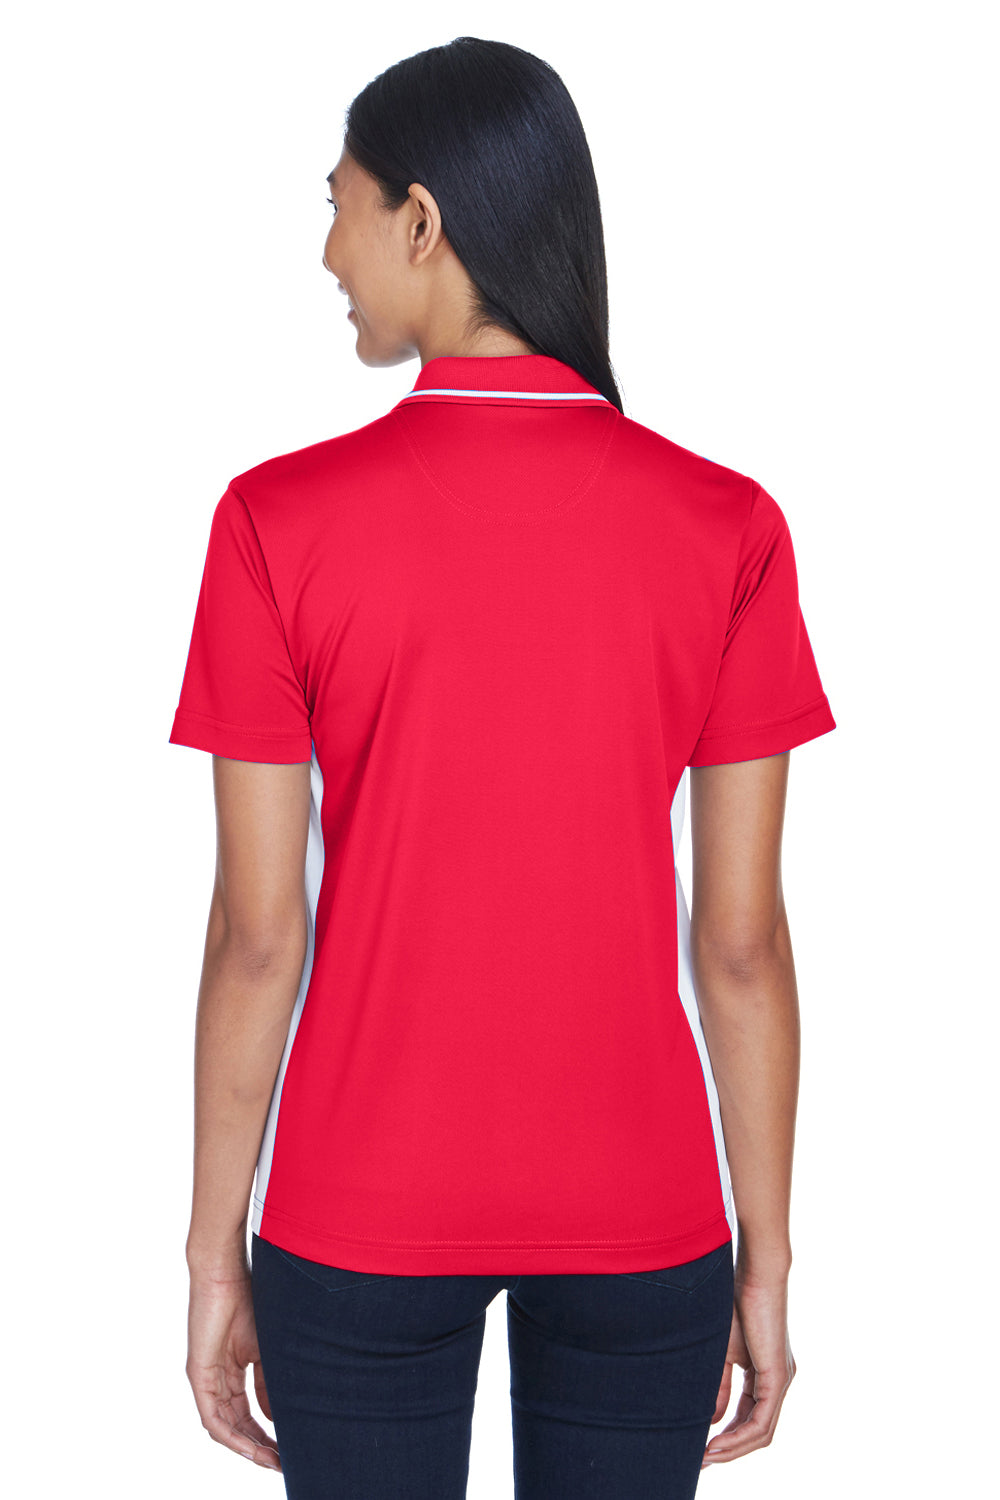 UltraClub 8406L Womens Cool & Dry Moisture Wicking Short Sleeve Polo Shirt Red/White Back